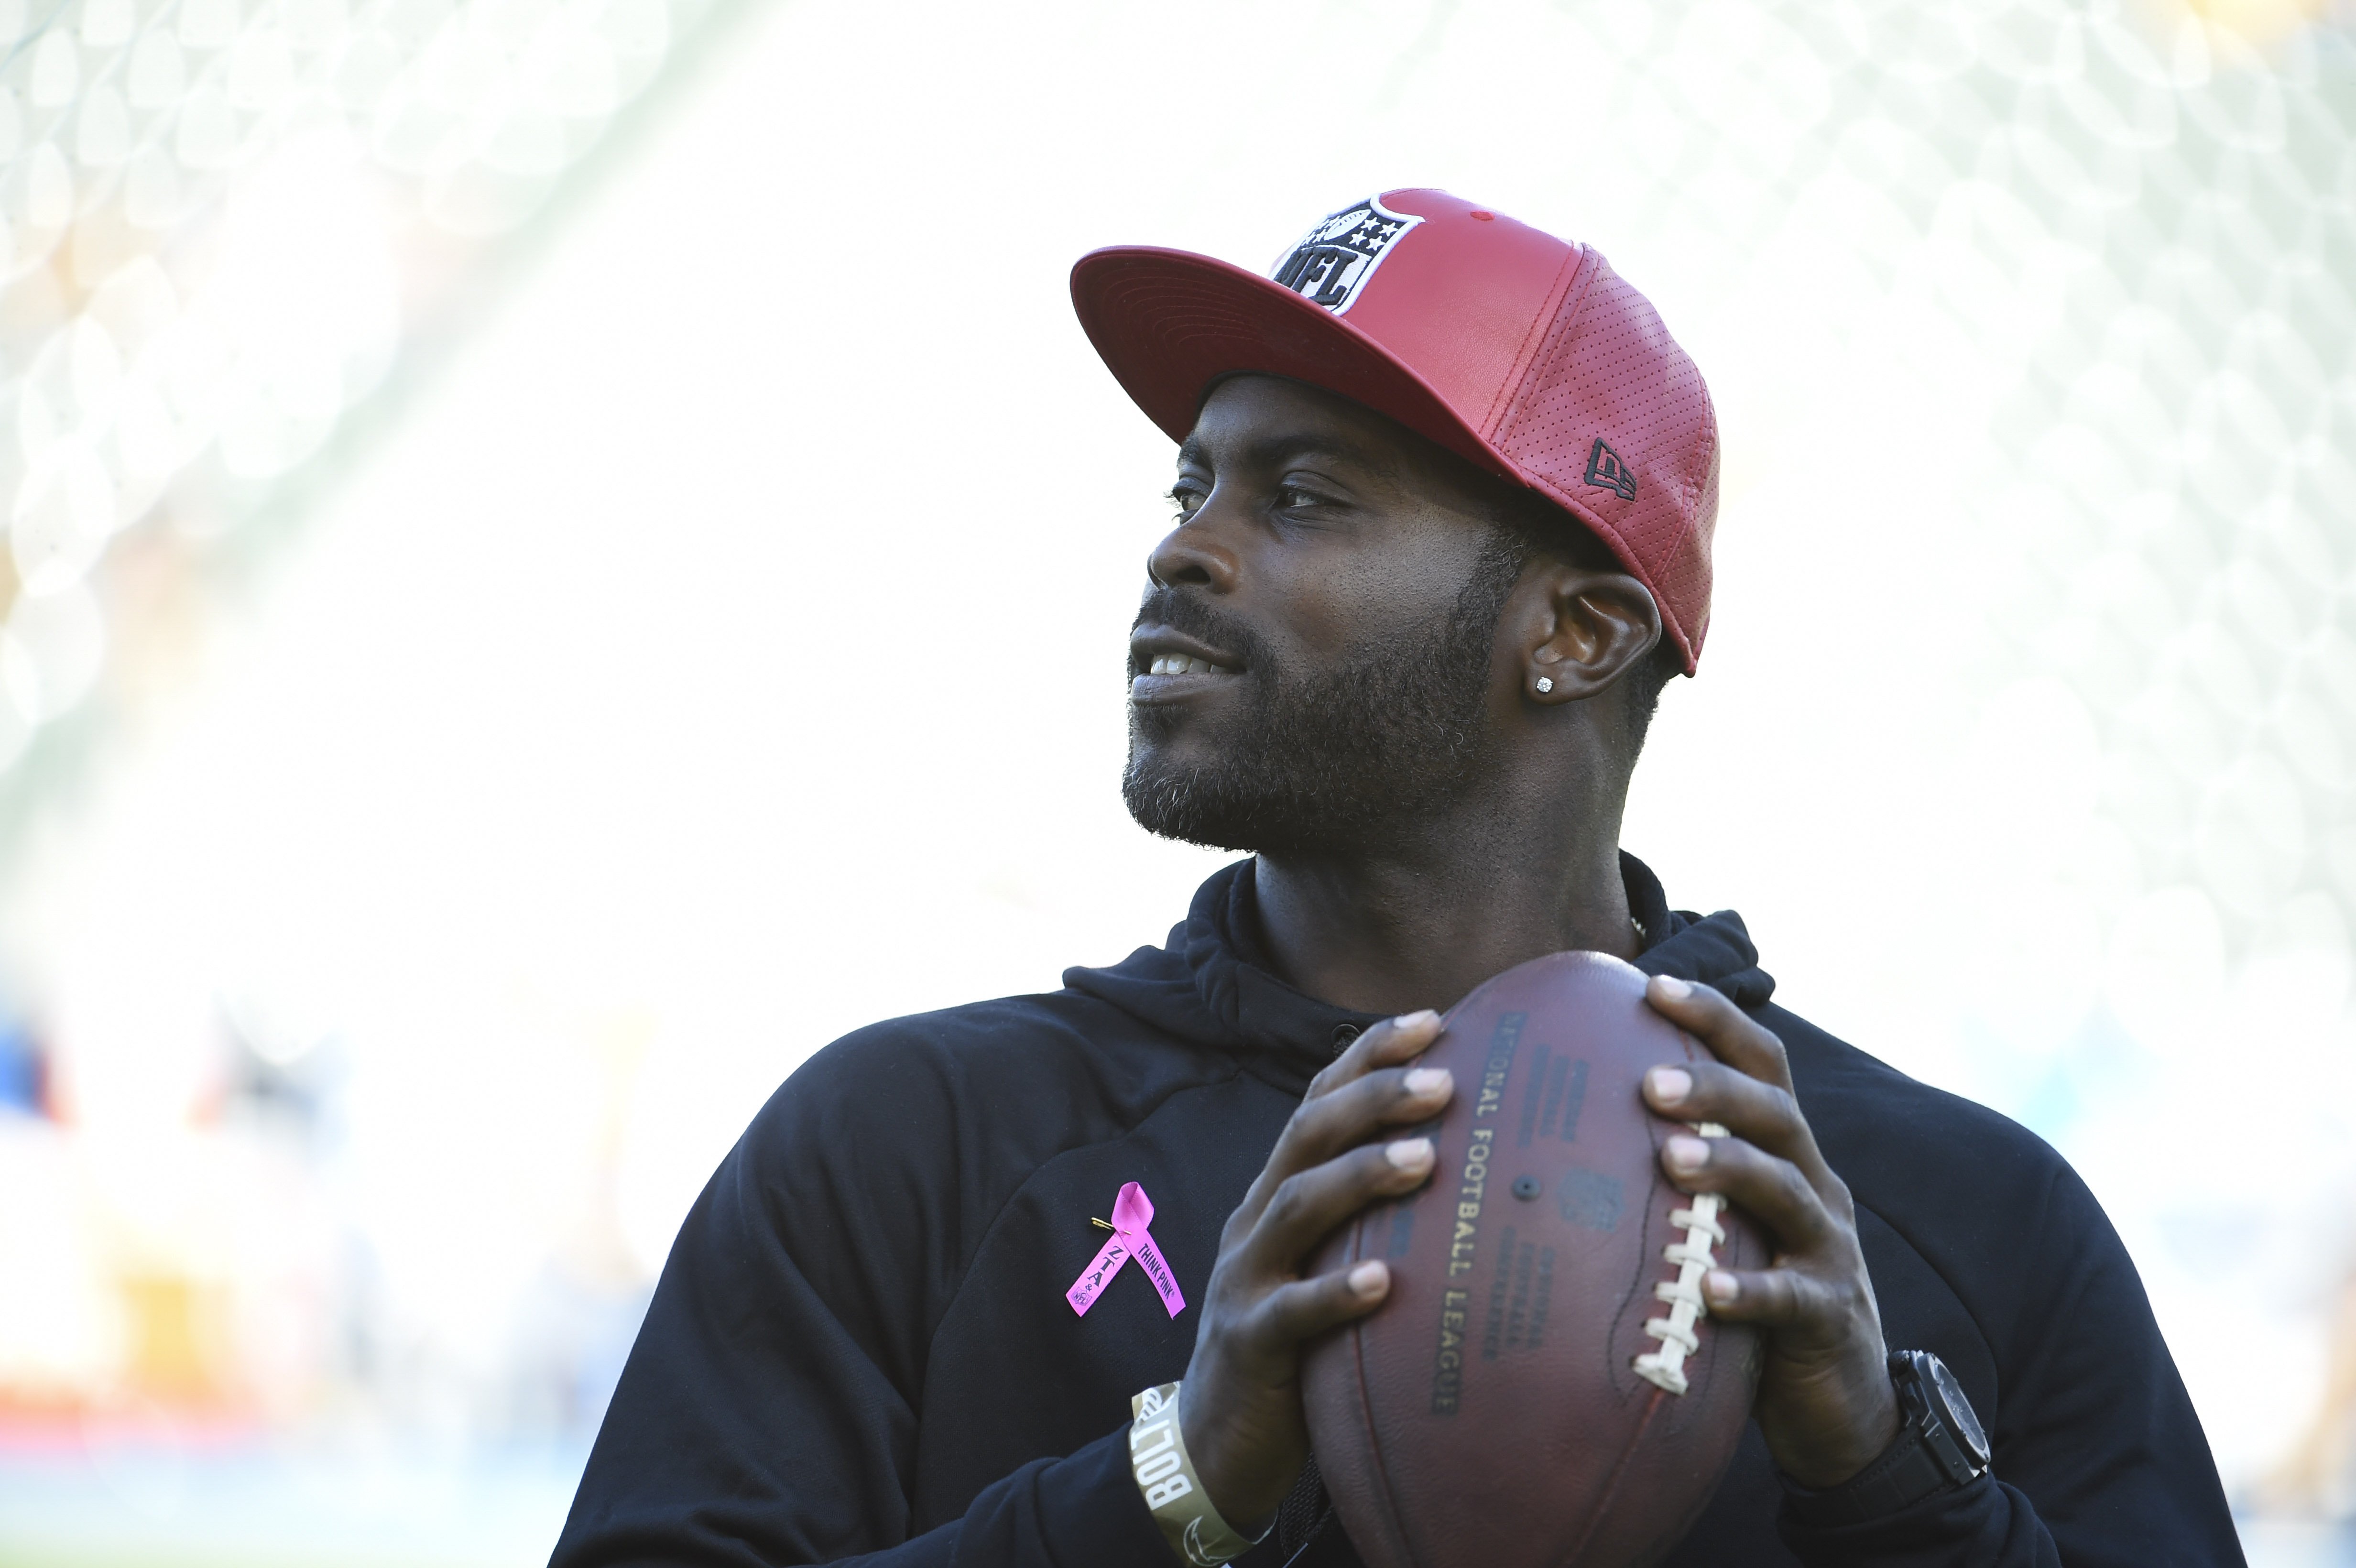 Former NFL quarterback Michael Vick stands on the field before a game between the Pittsburgh Steelers and the Los Angeles Chargers at Dignity Health Sports Park October 13, 2019 in Carson, California.